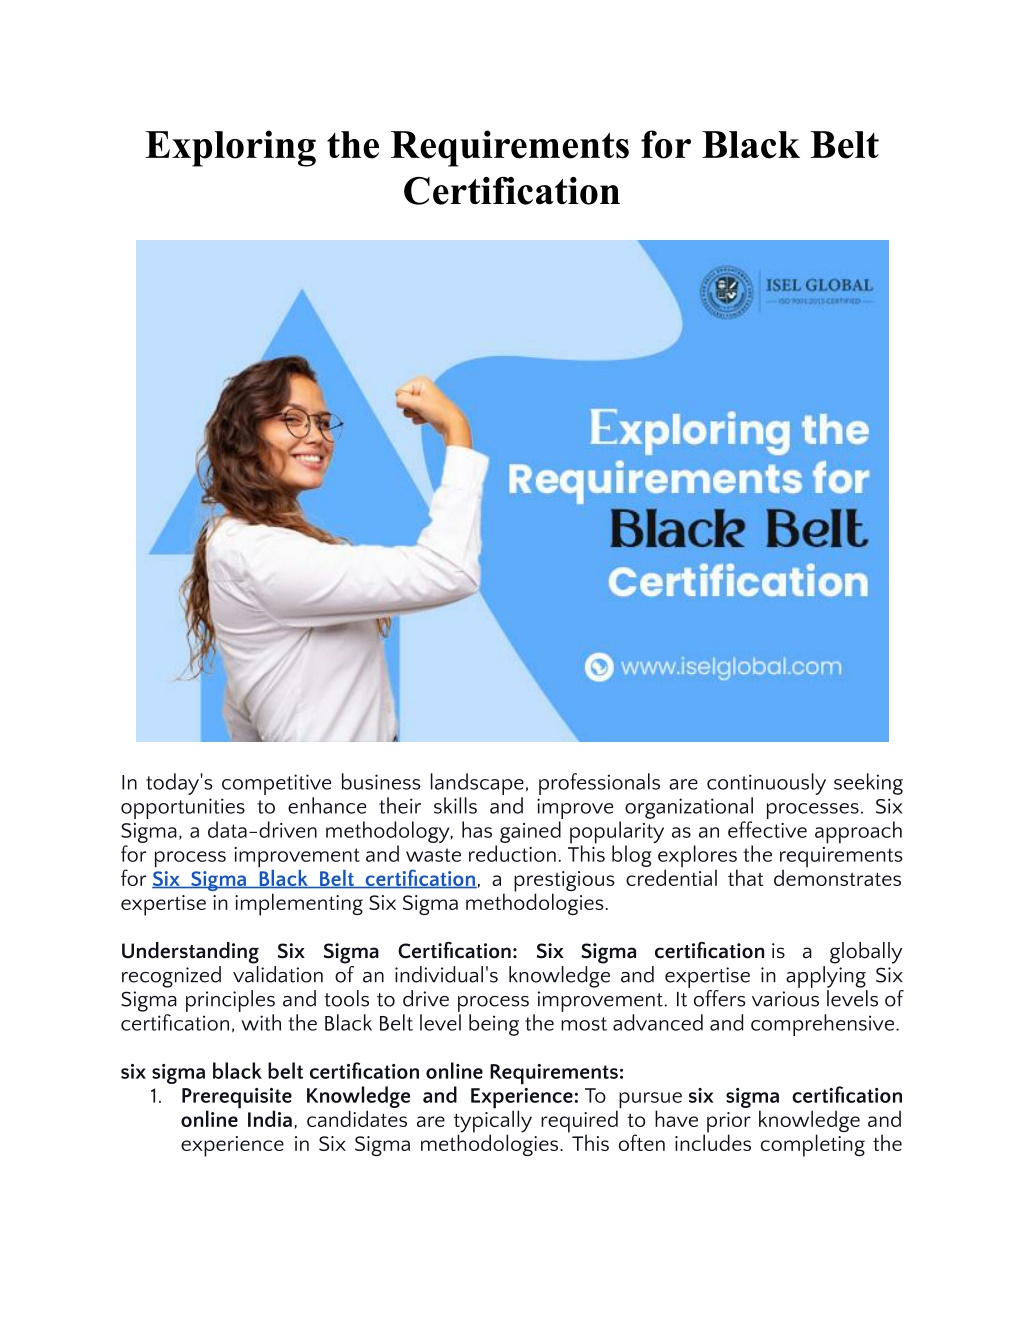 PPT - Exploring the Requirements for Black Belt Certification.docx ...